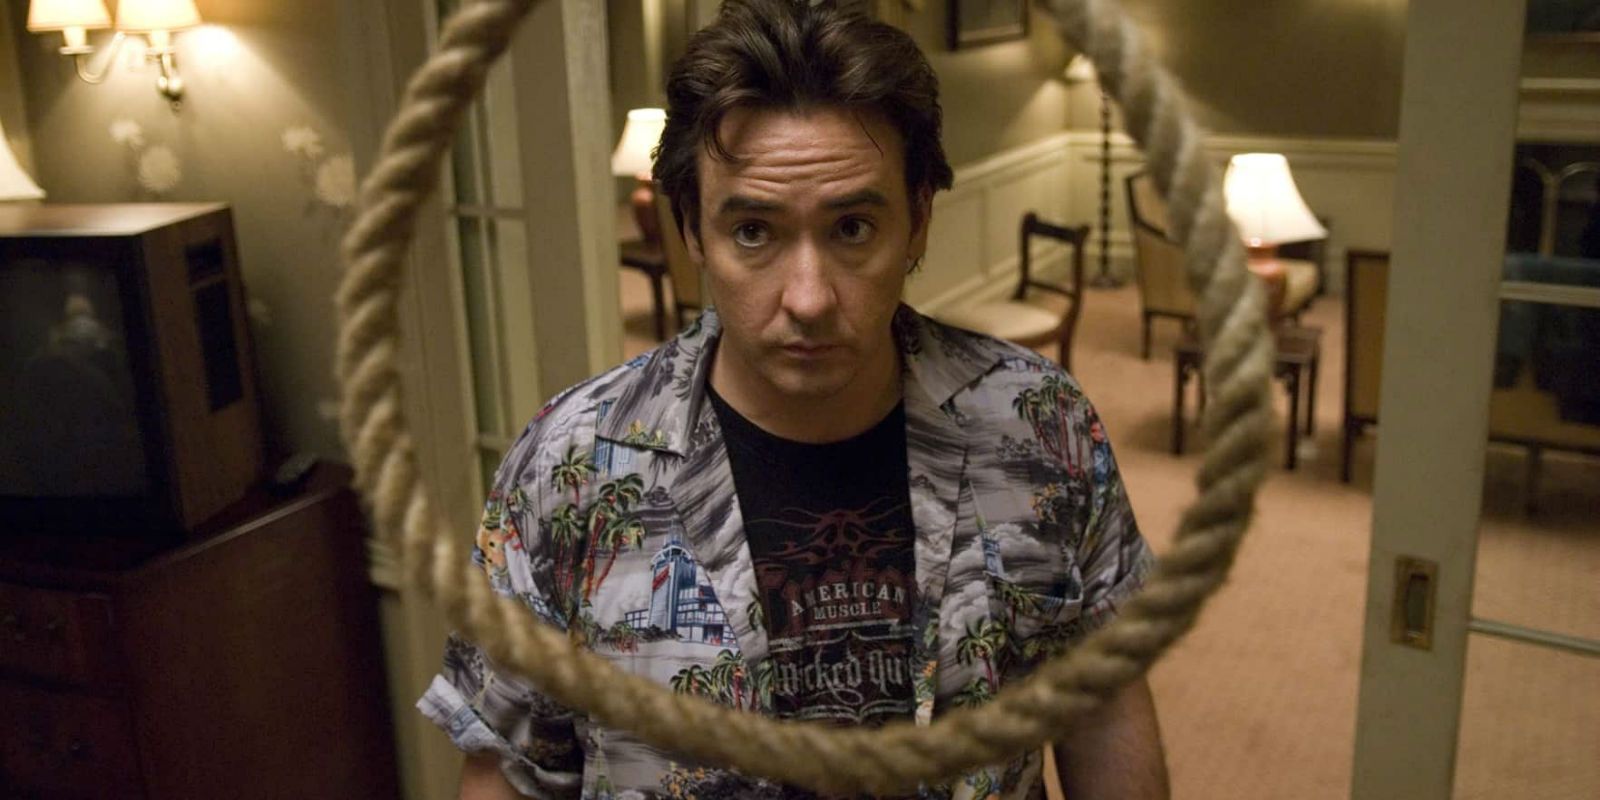 John Cusack looks alarmingly at a hanging noose in his hotel room in 1408.